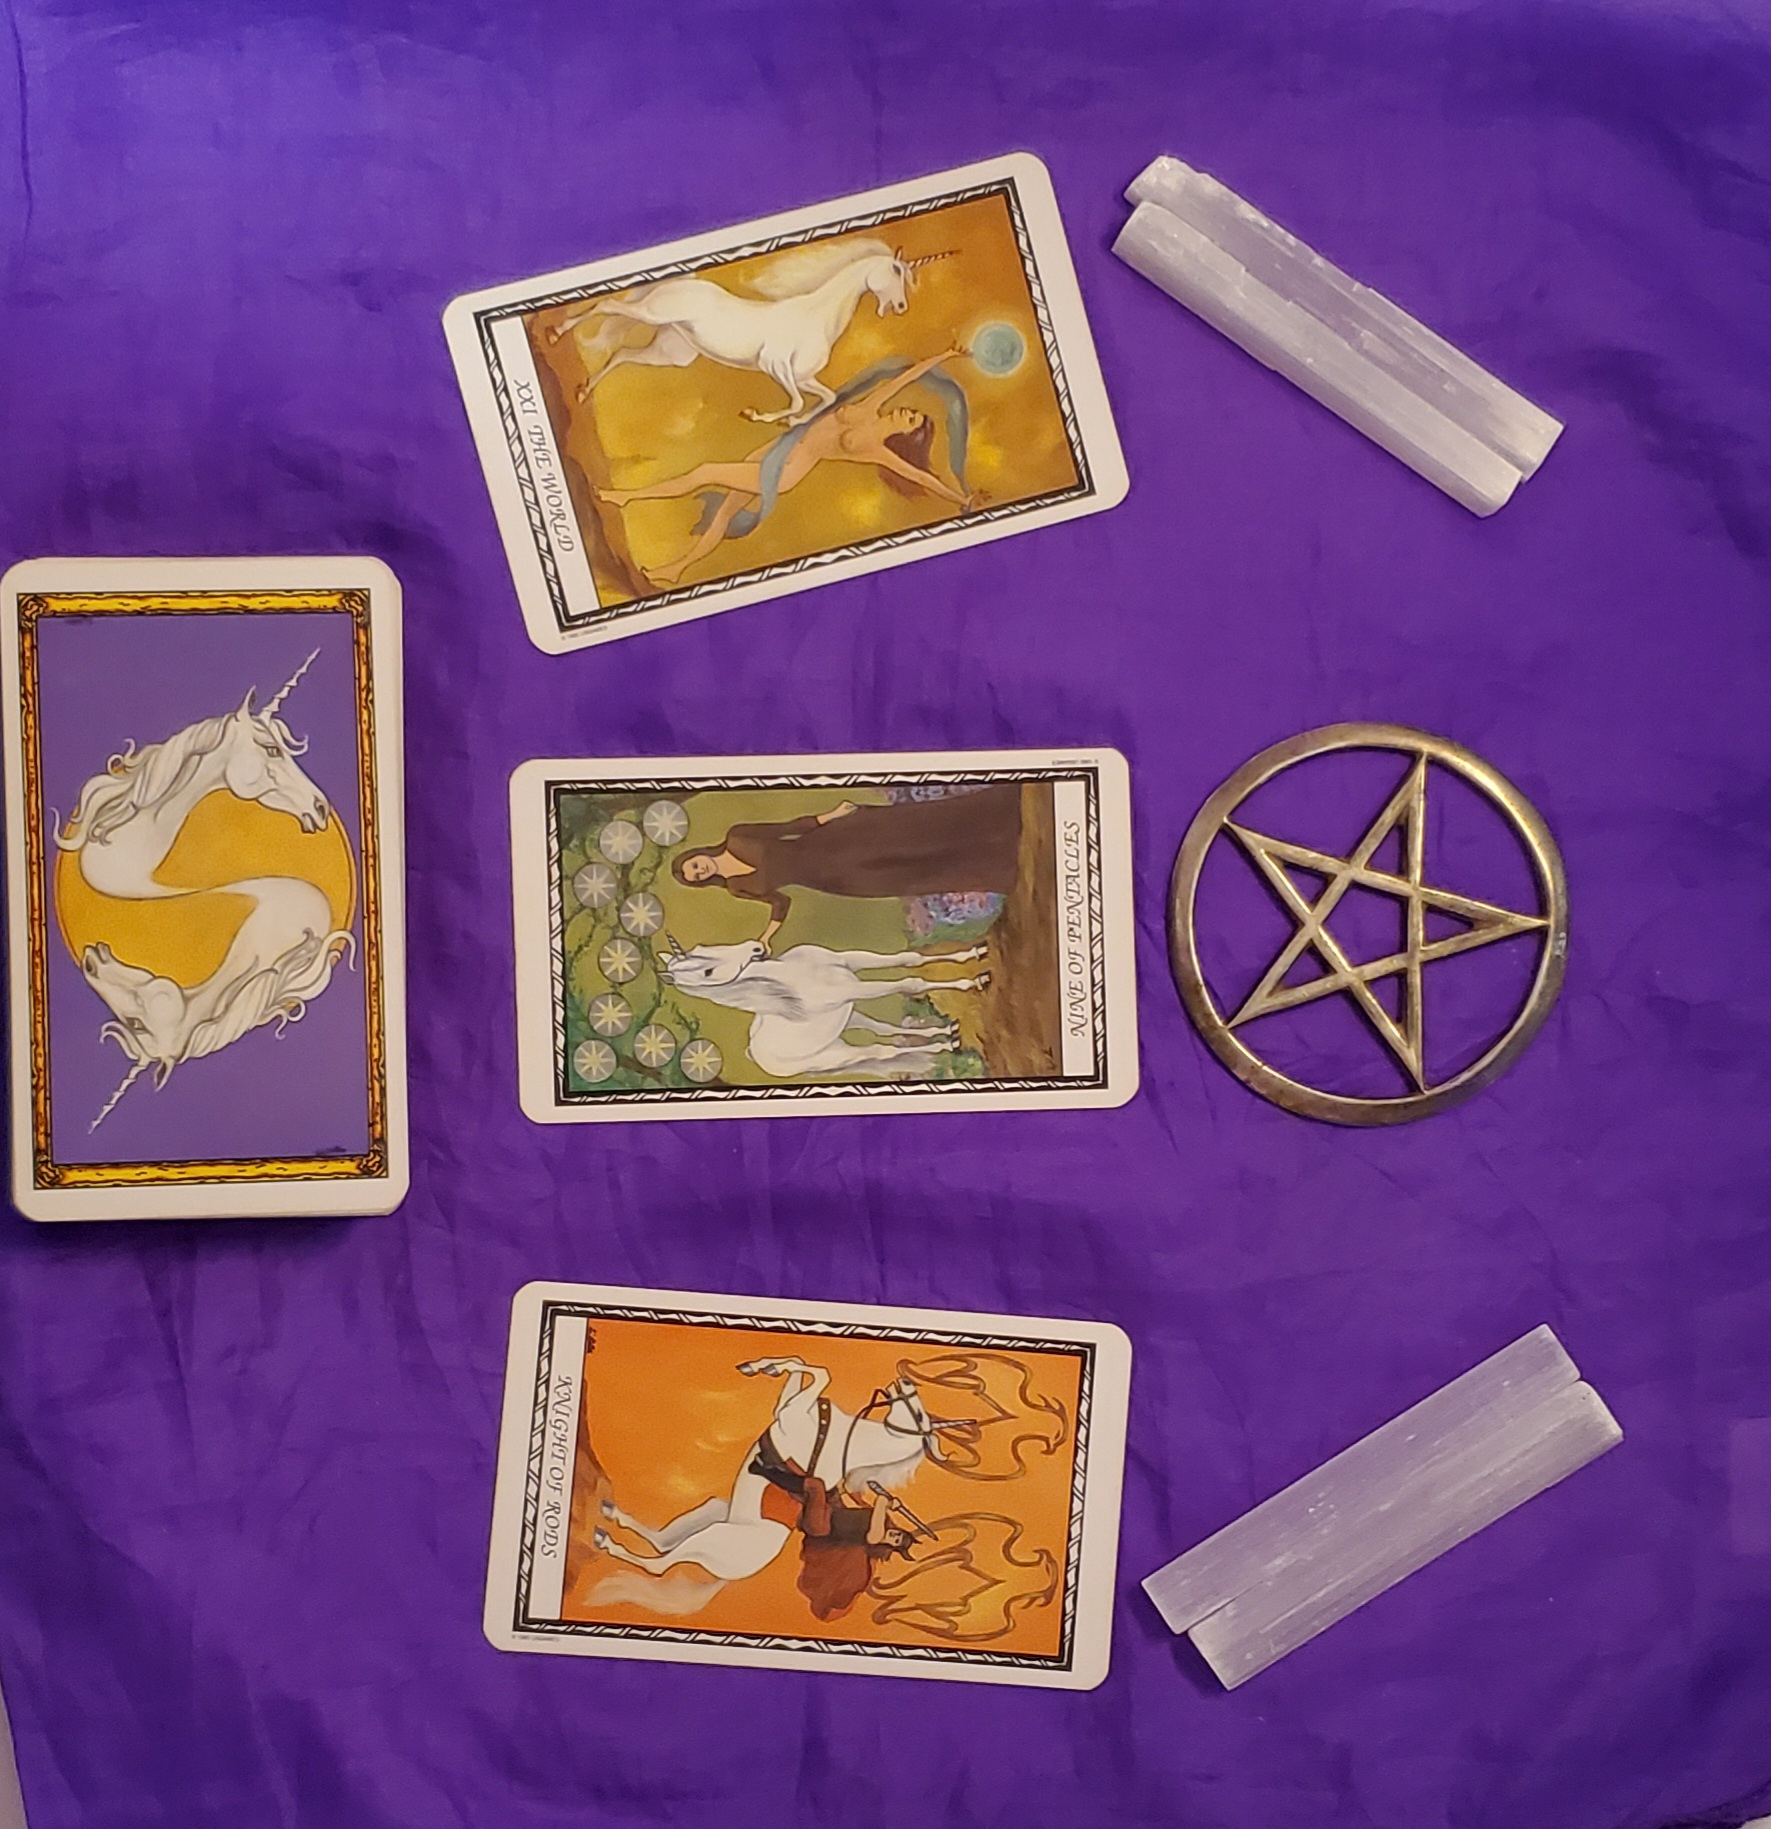 Right side center is a deck of unicorn tarot cards, face down. 3 tarot cards are drawn next to this. On the right is a silver pentacle, with 4 selenite sticks